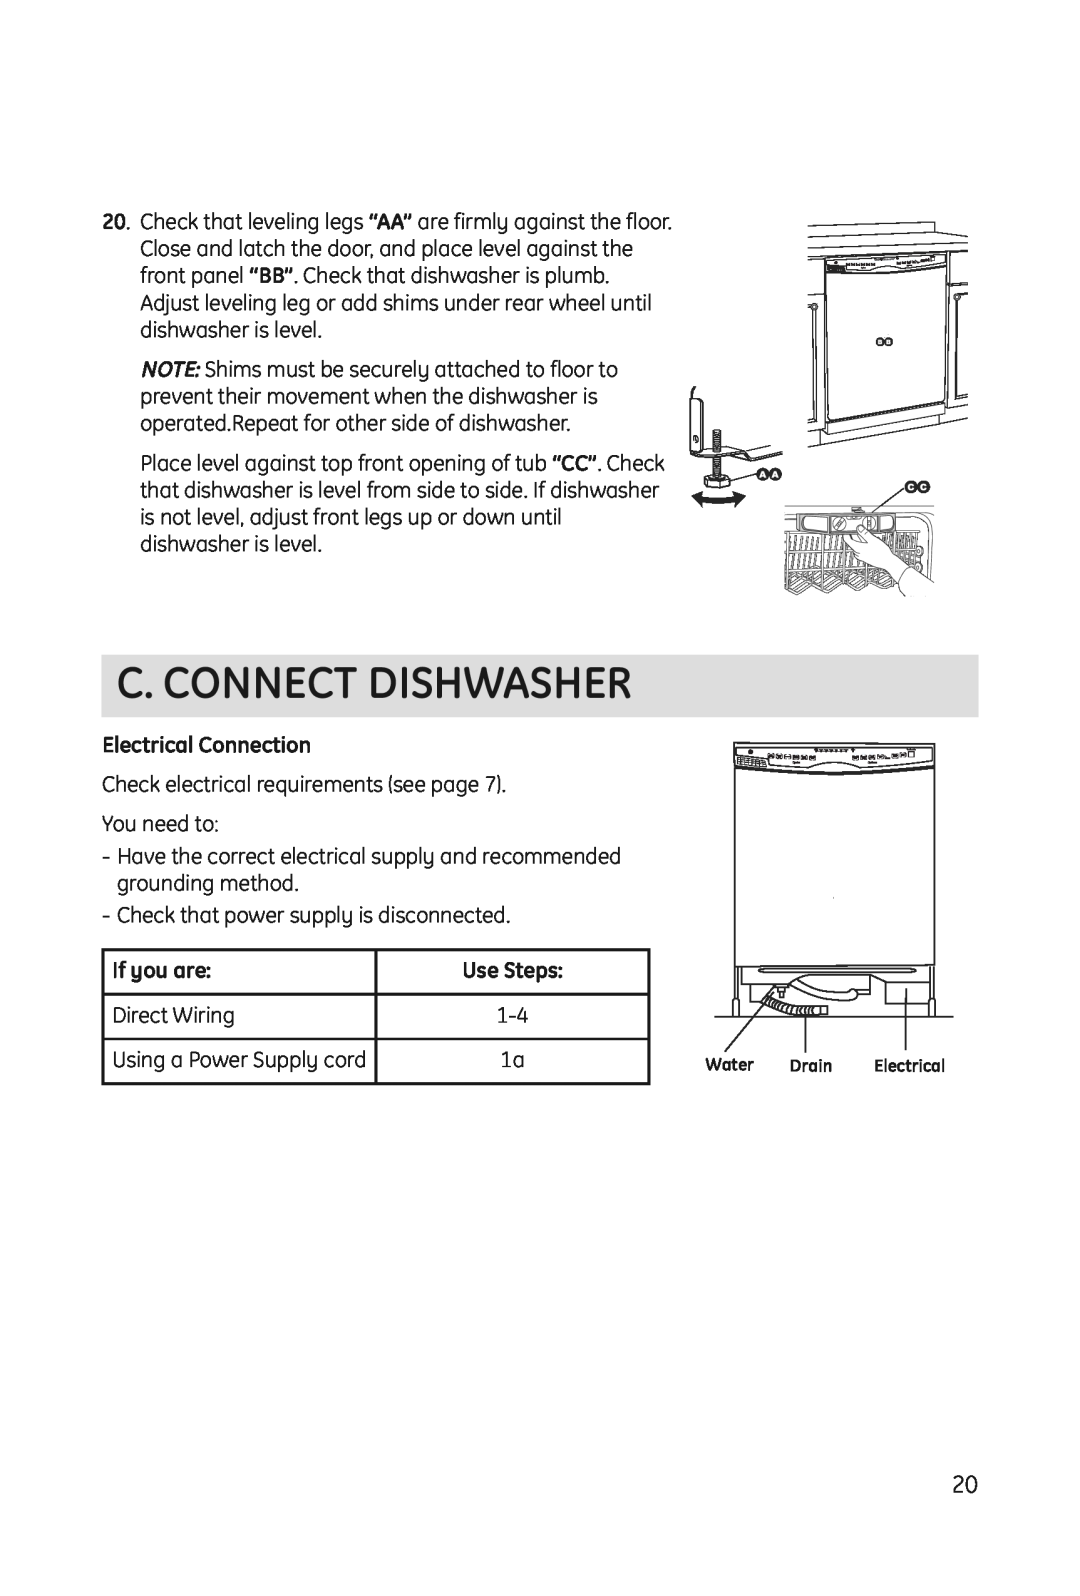 Haier DWL3025 installation manual C. Connect Dishwasher, Electrical Connection, If you are, Use Steps 